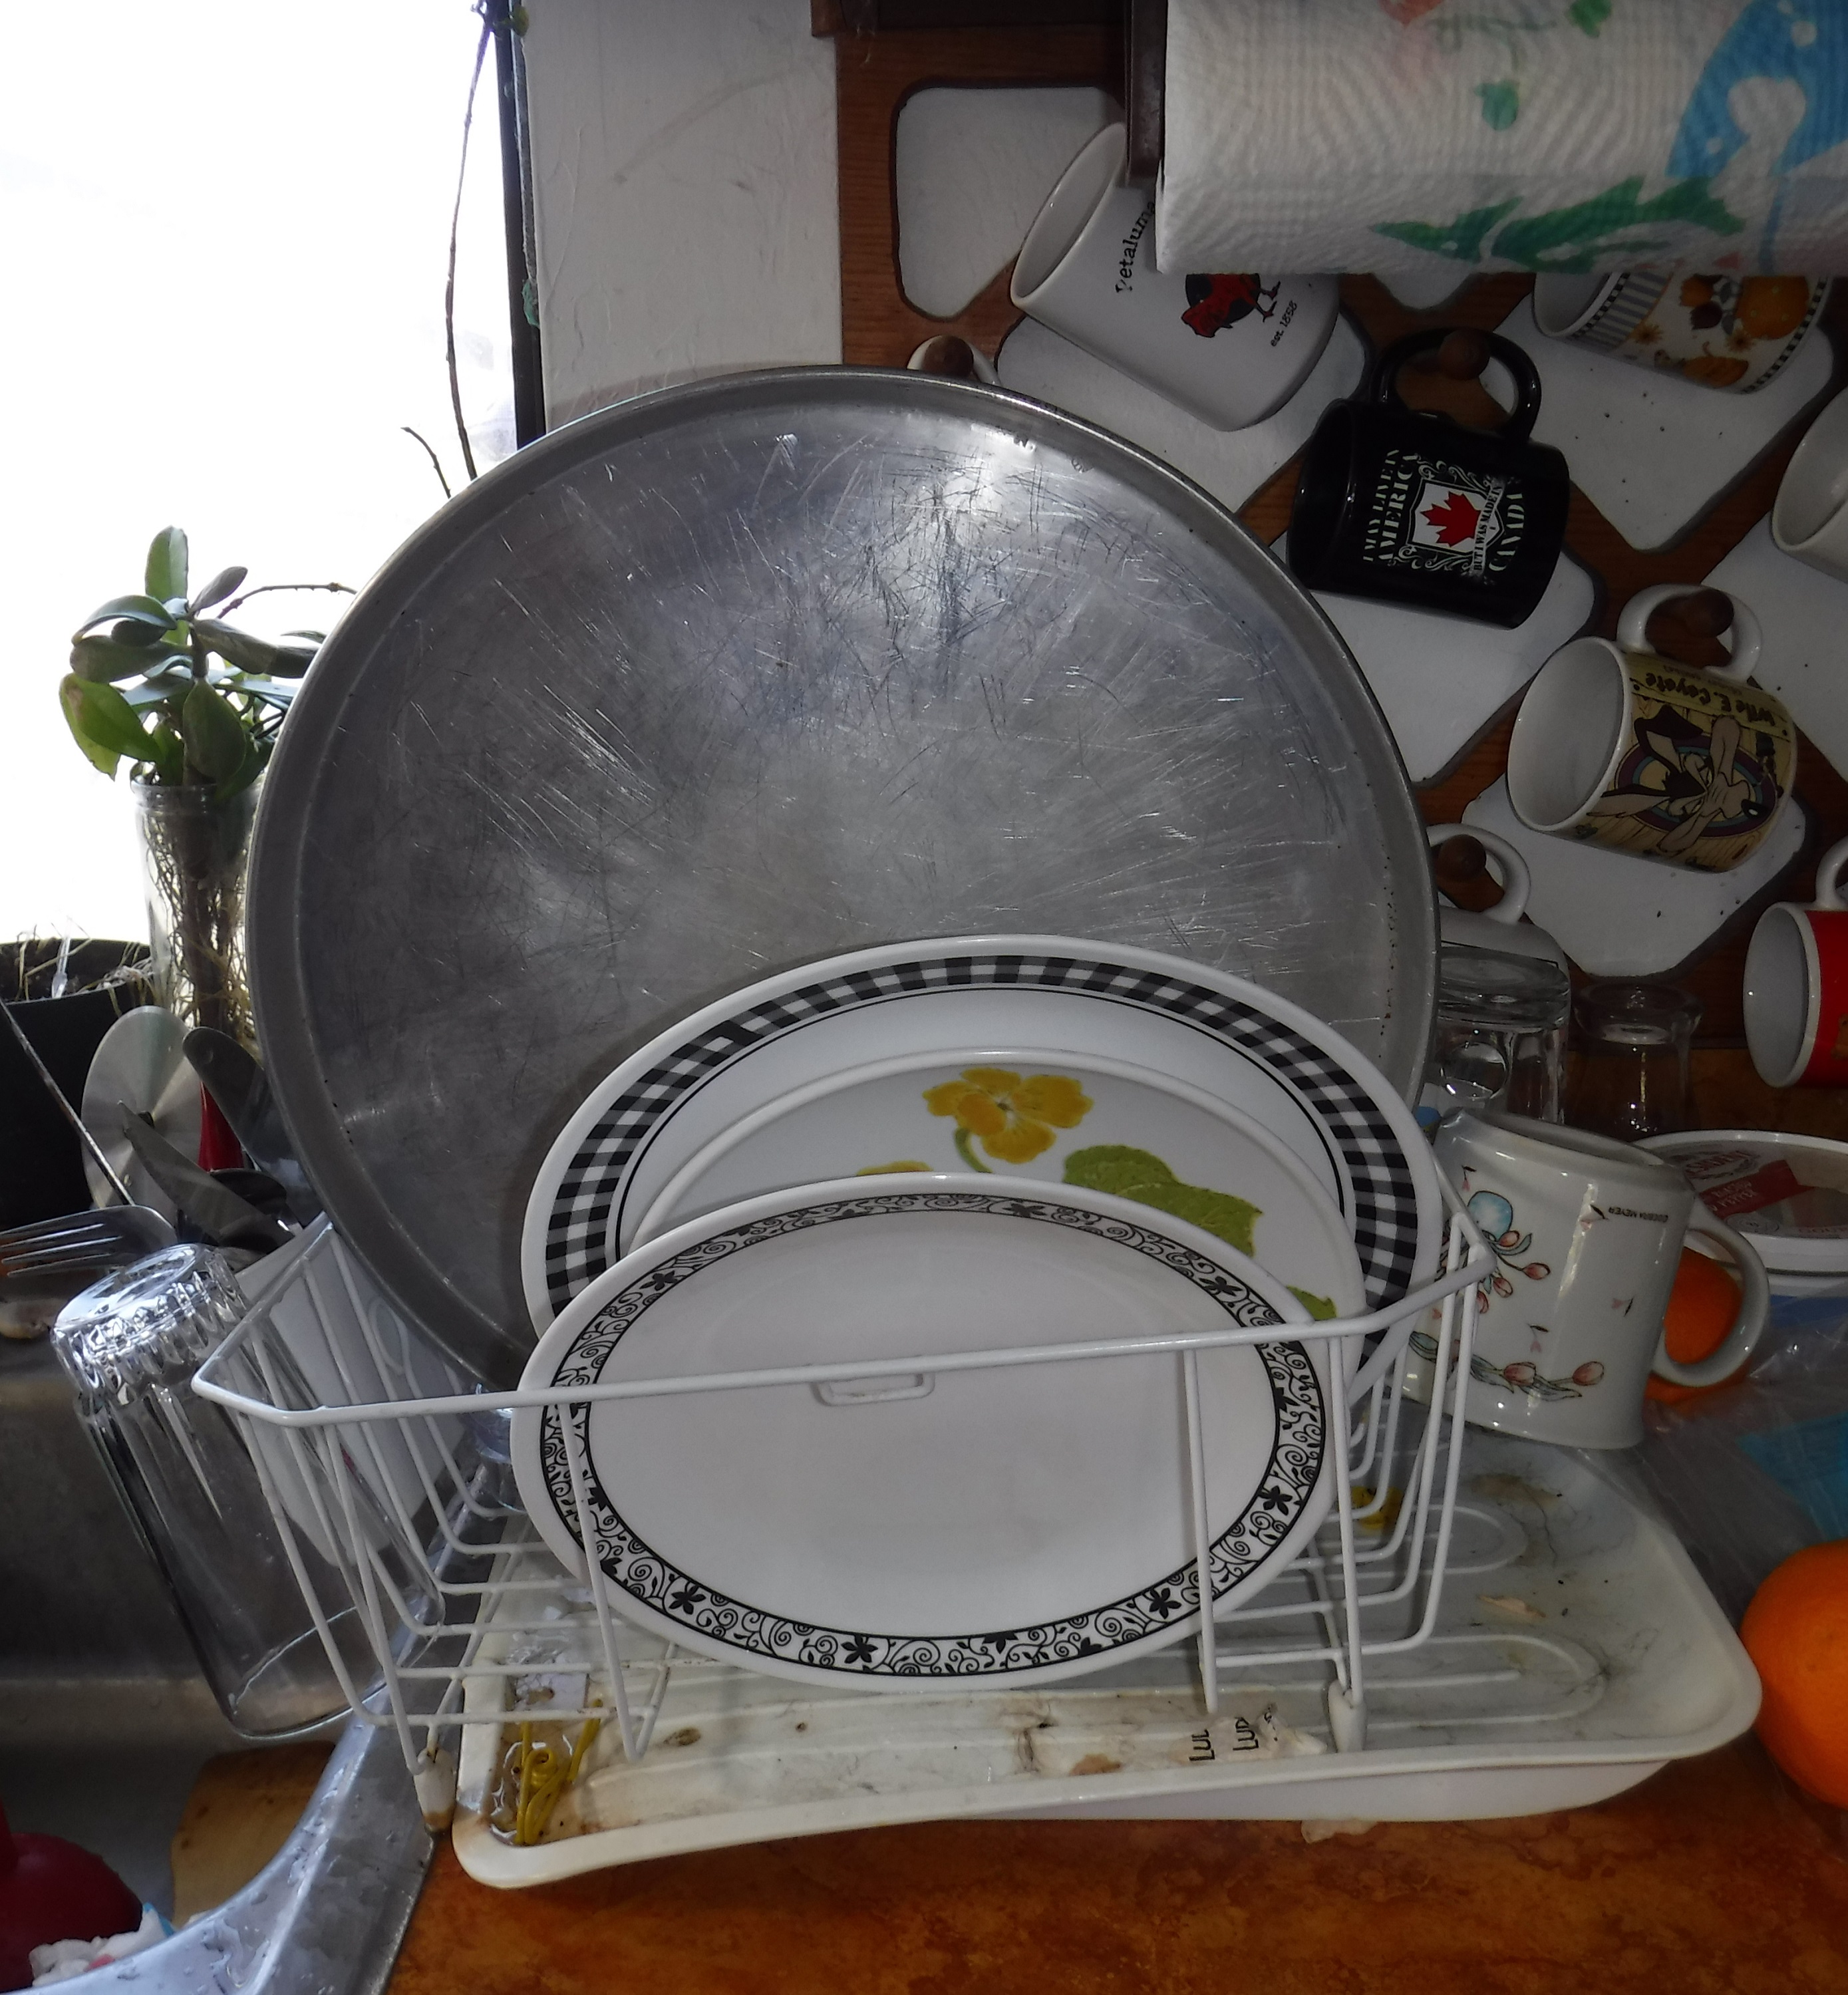 Photo I took of the dishes in the dish rack